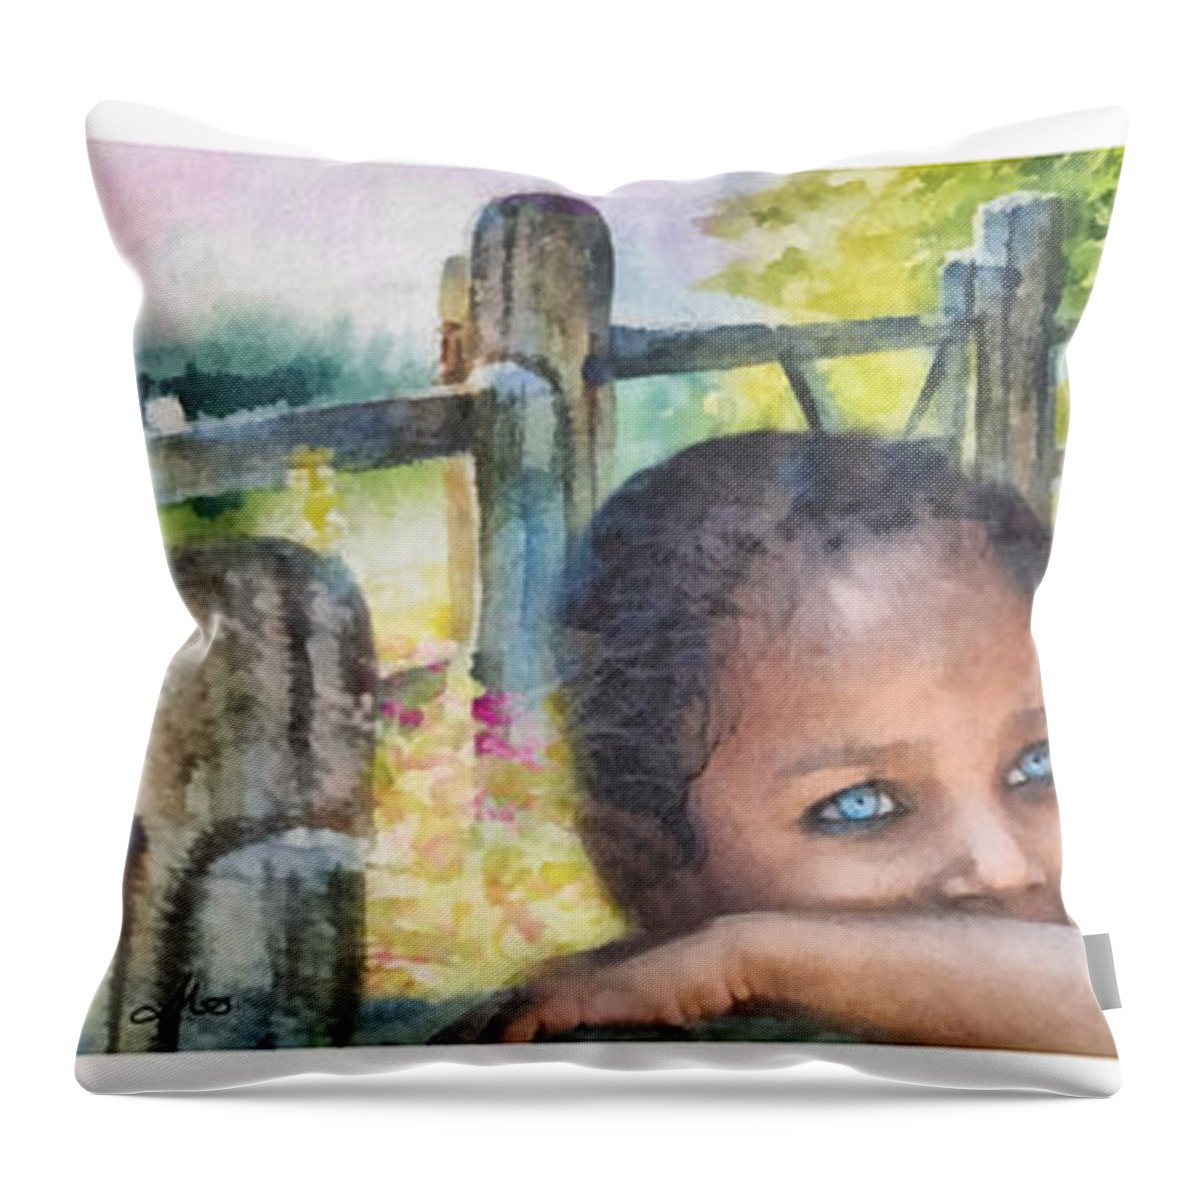 Childhood Triptic Throw Pillow featuring the painting Childhood Triptic by Mo T